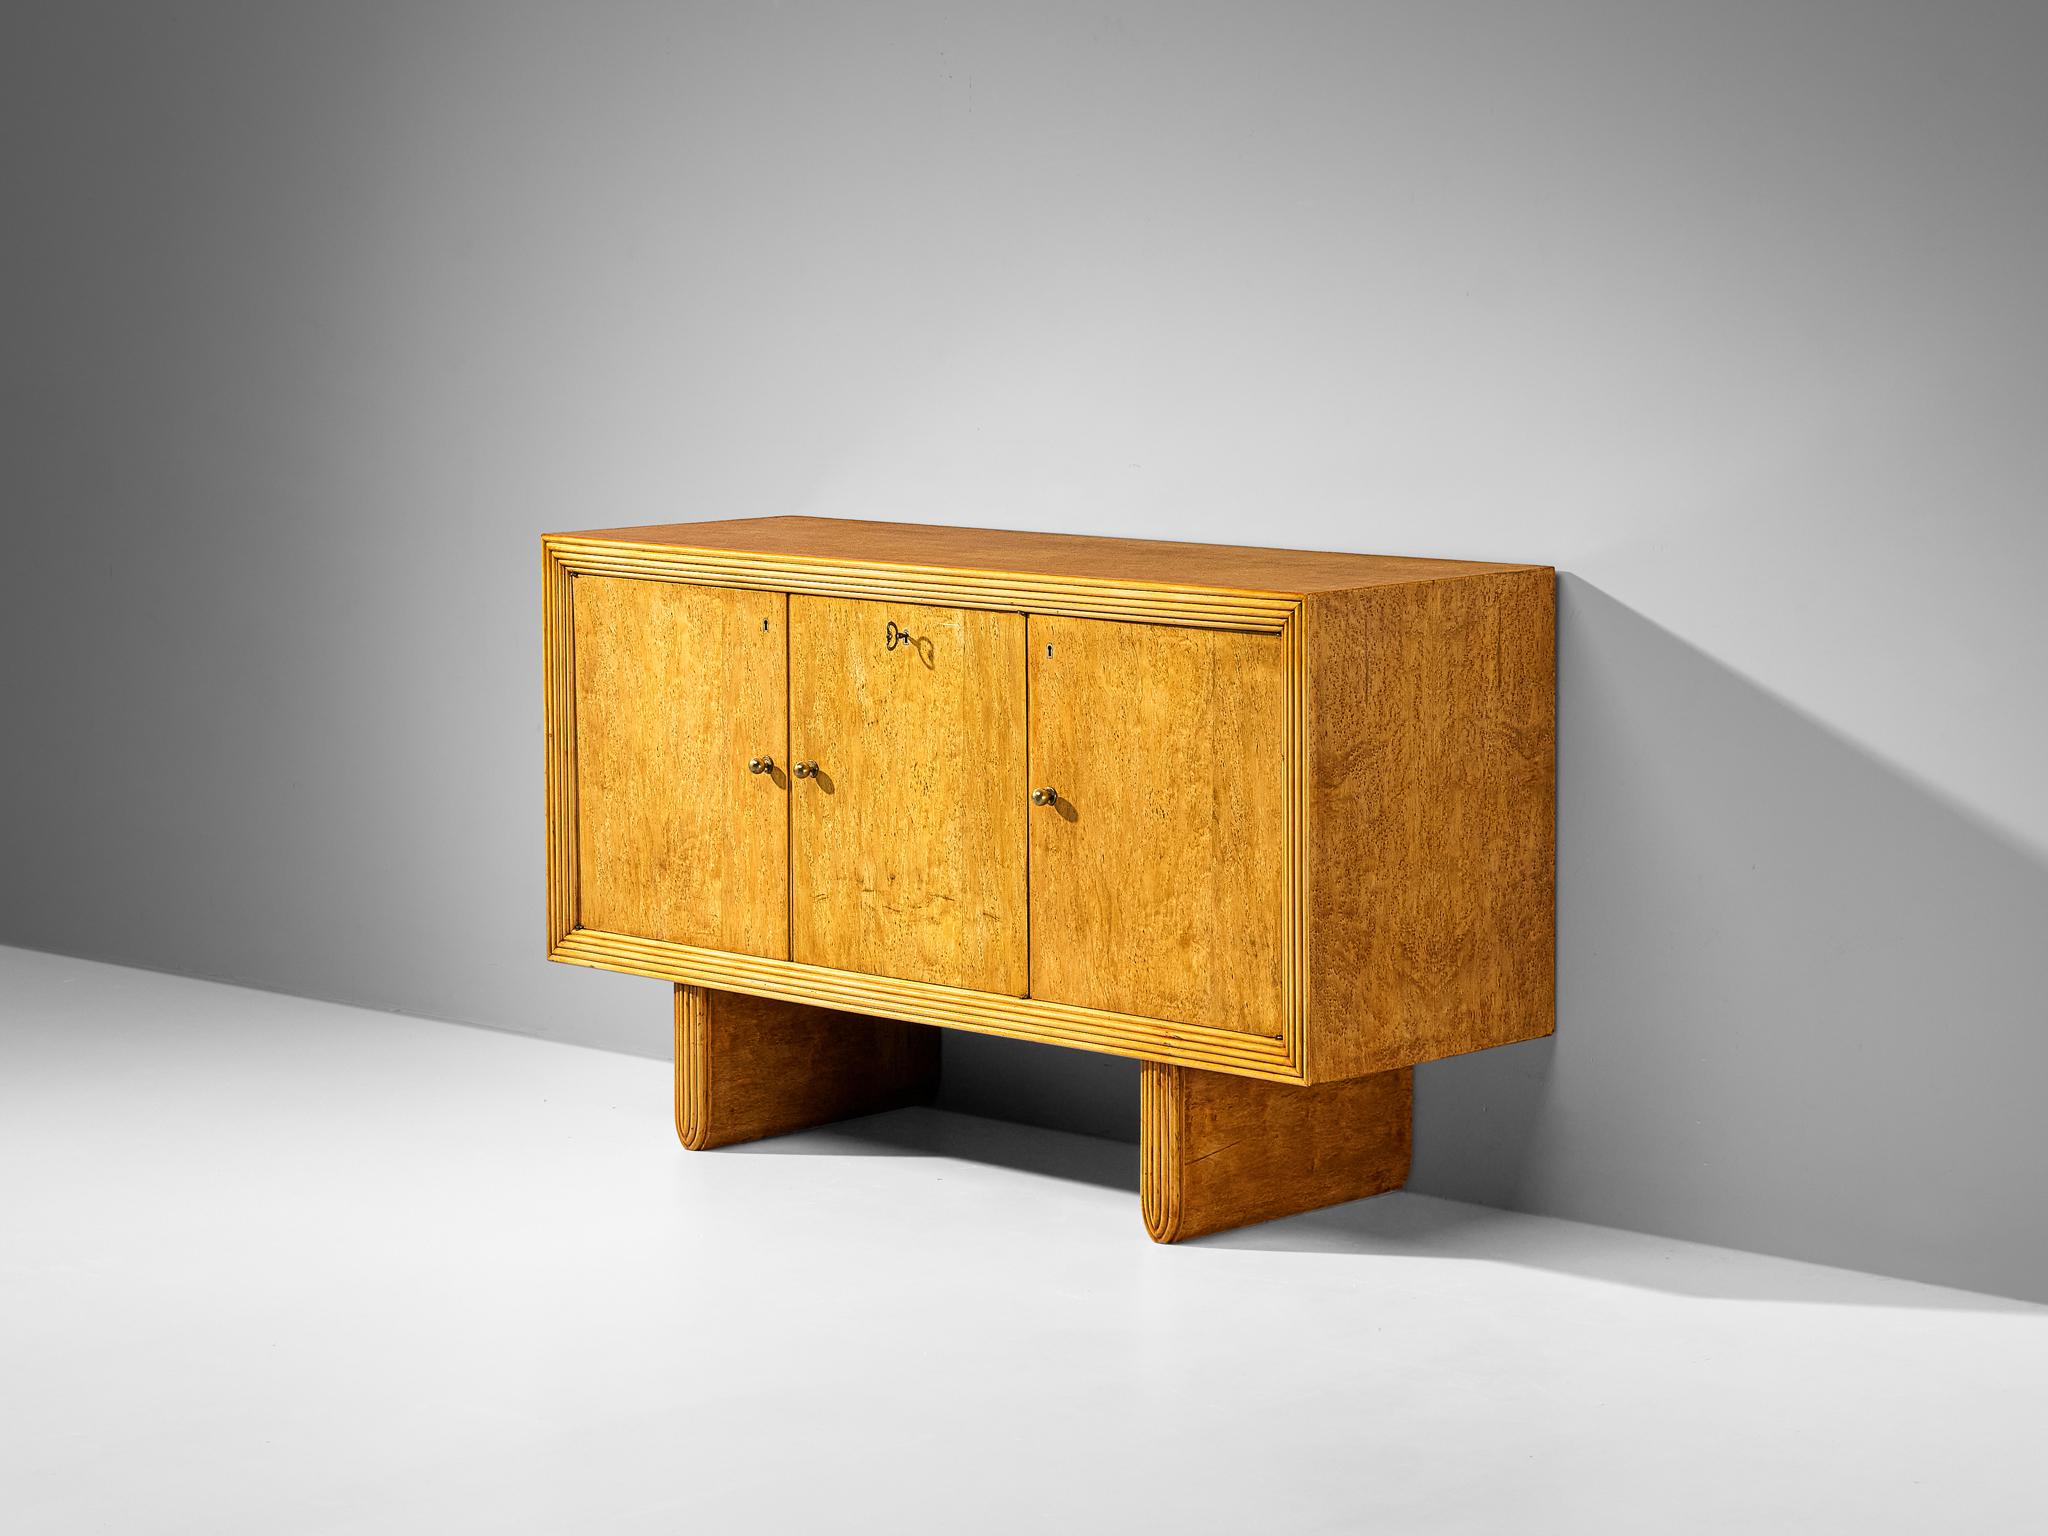 Sideboard, birdseye maple veneer, birch burl veneer, brass, Italy, 1950s

This truly exceptional sideboard is from Italy, showcasing its excellence in composition, material use, and intricate detailing. The rectangular-shaped corpus is framed by a